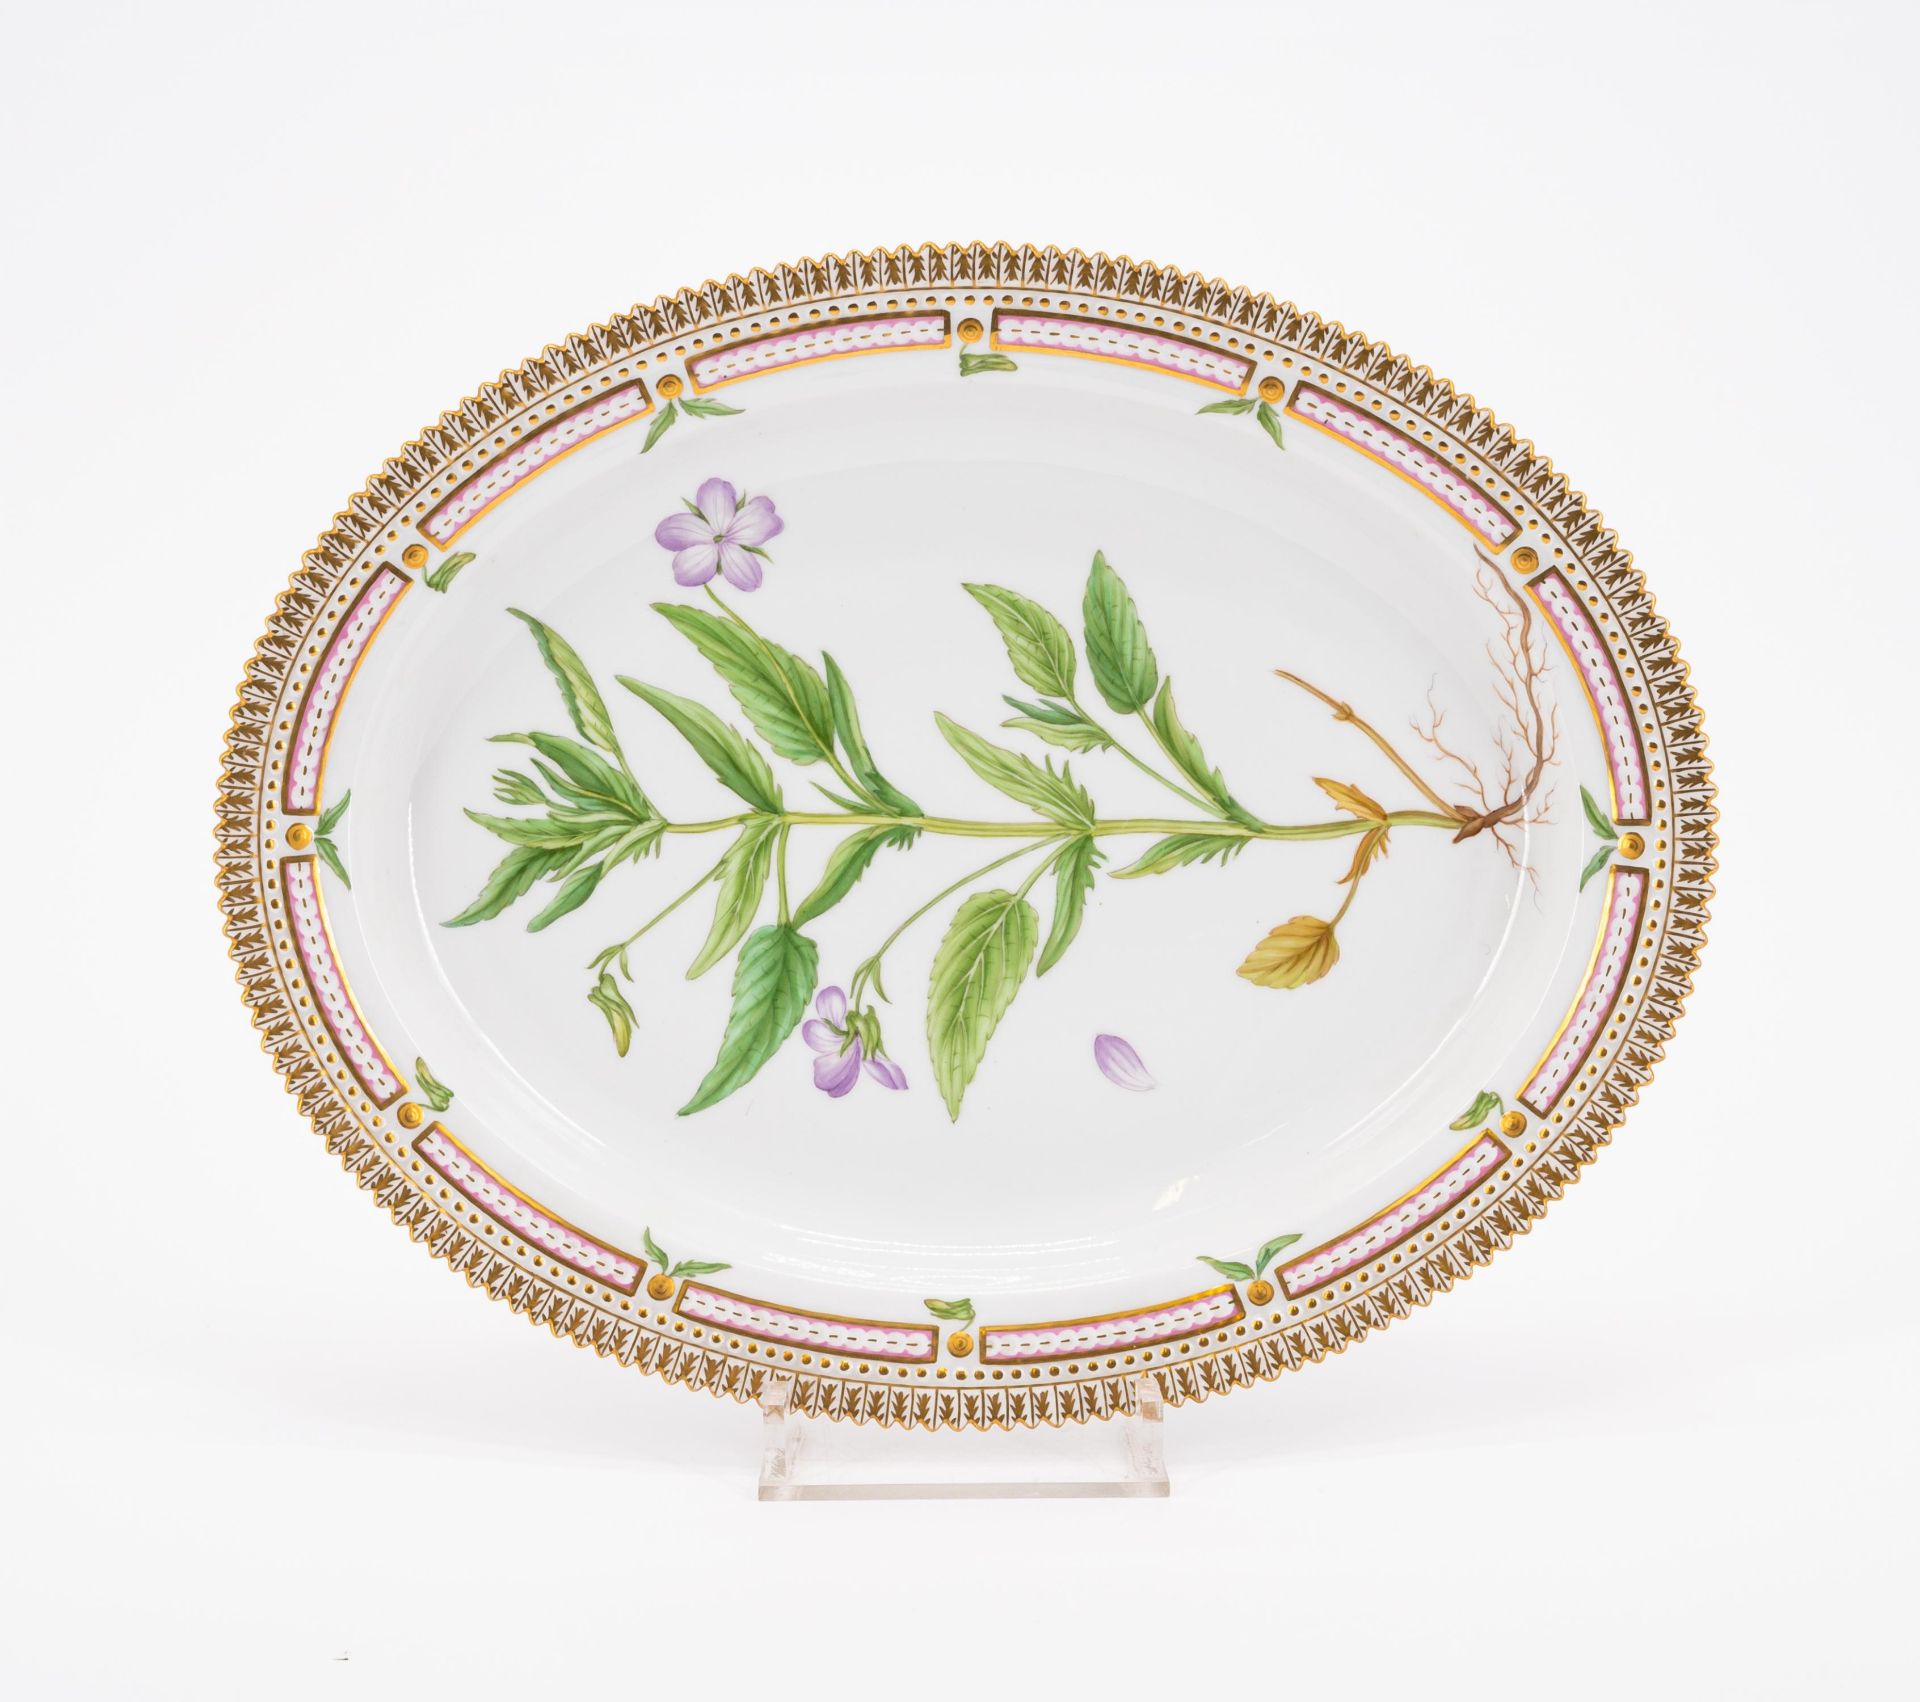 18 PIECES FROM A PORCELAIN DINNER SERVICE 'FLORA DANICA' - Image 7 of 26